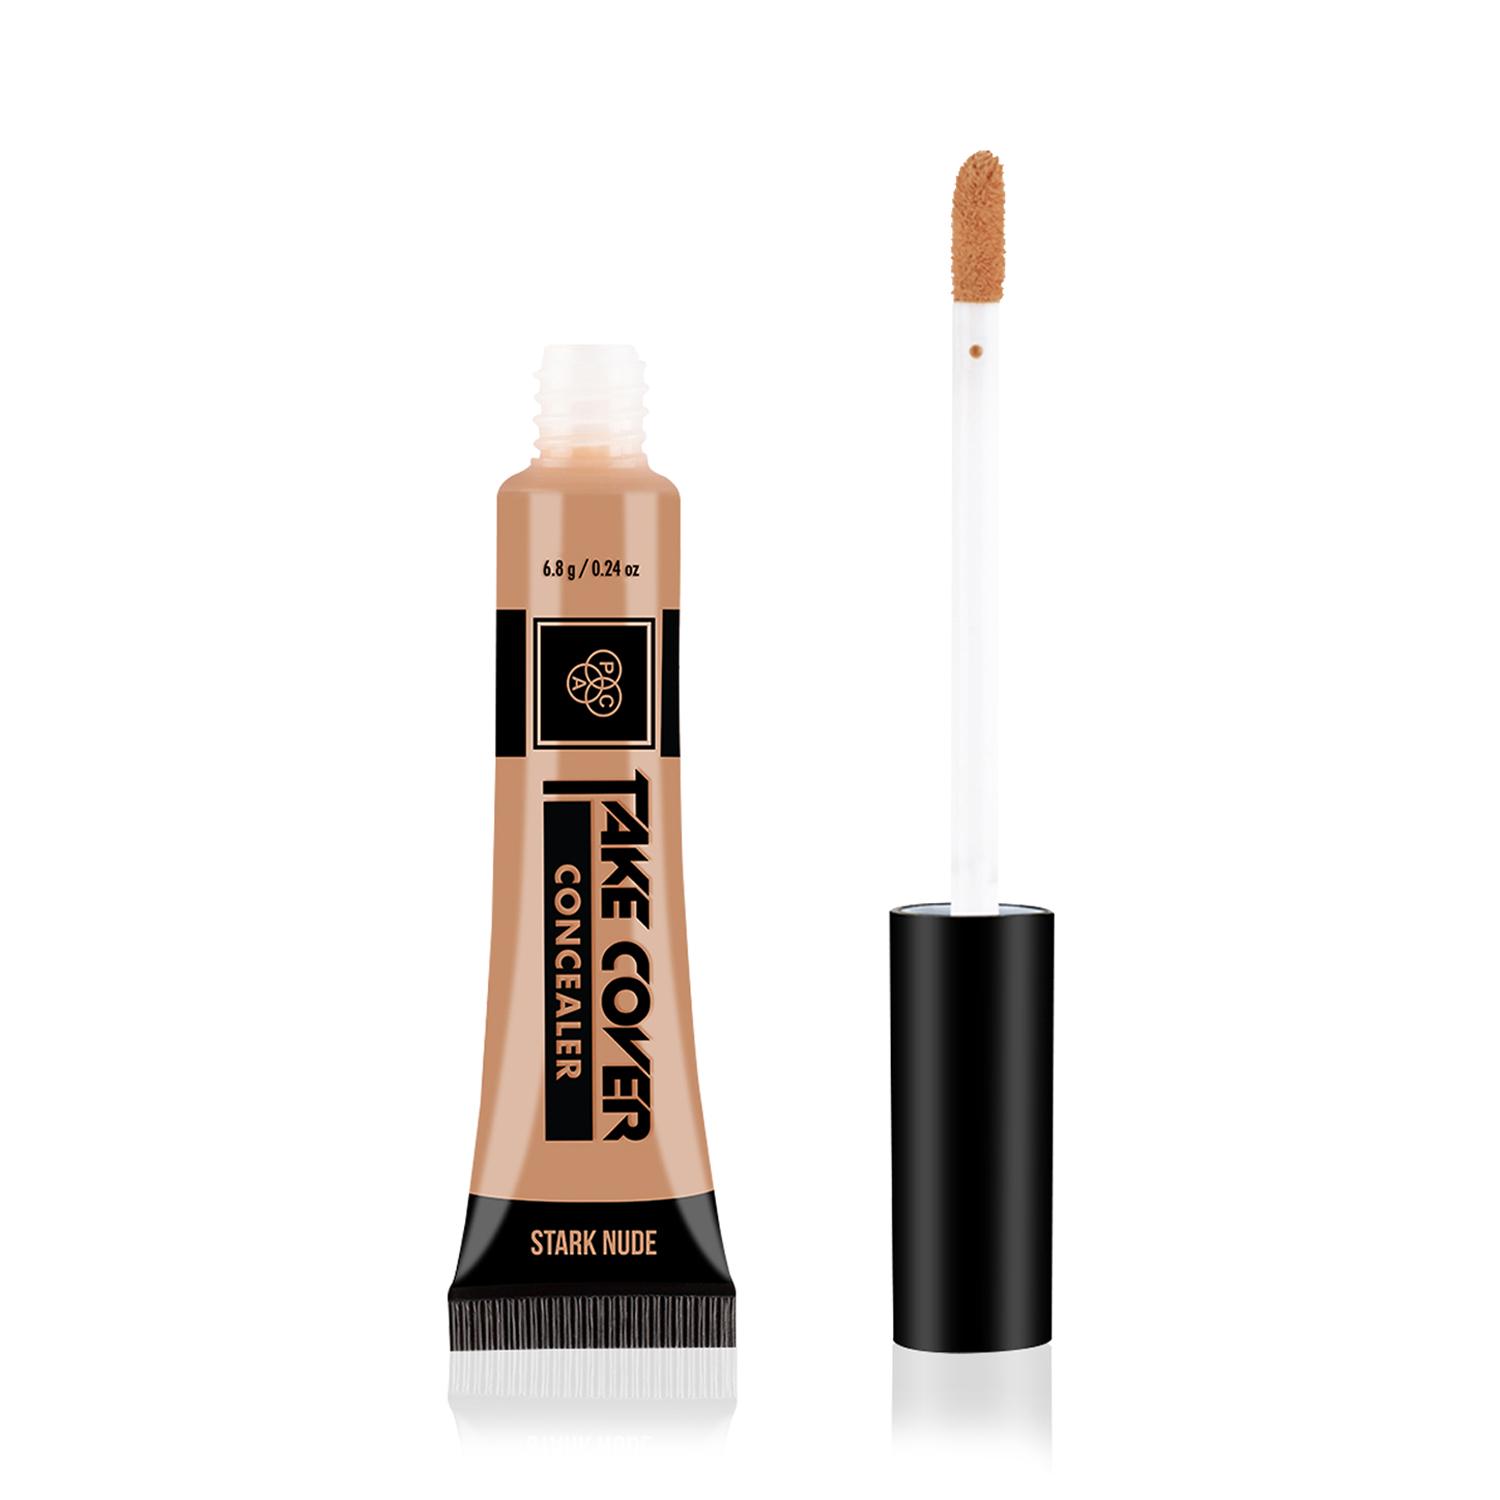 PAC | PAC Take Cover Concealer - 08 Stark Nude (6.8g)